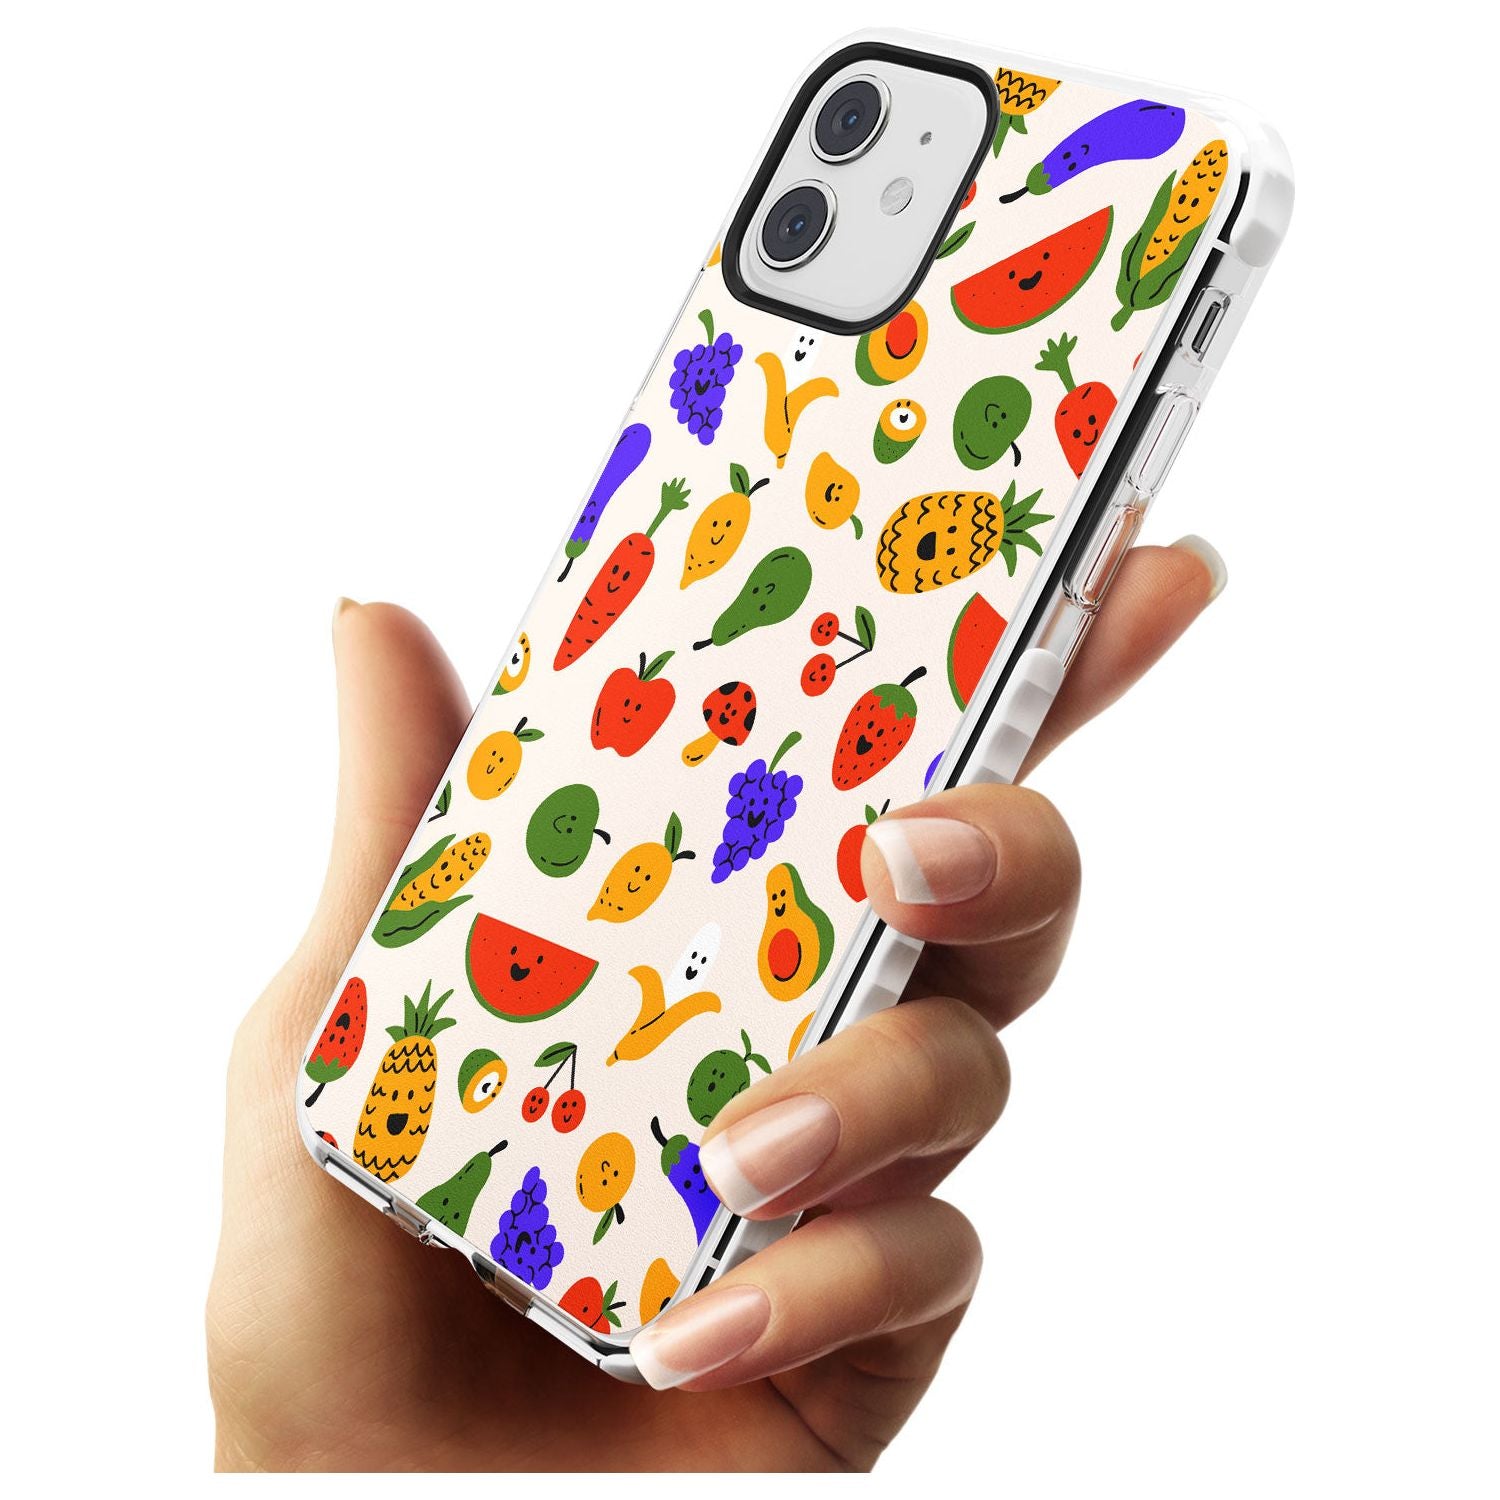 Mixed Kawaii Food Icons - Solid iPhone Case Impact Phone Case Warehouse 11